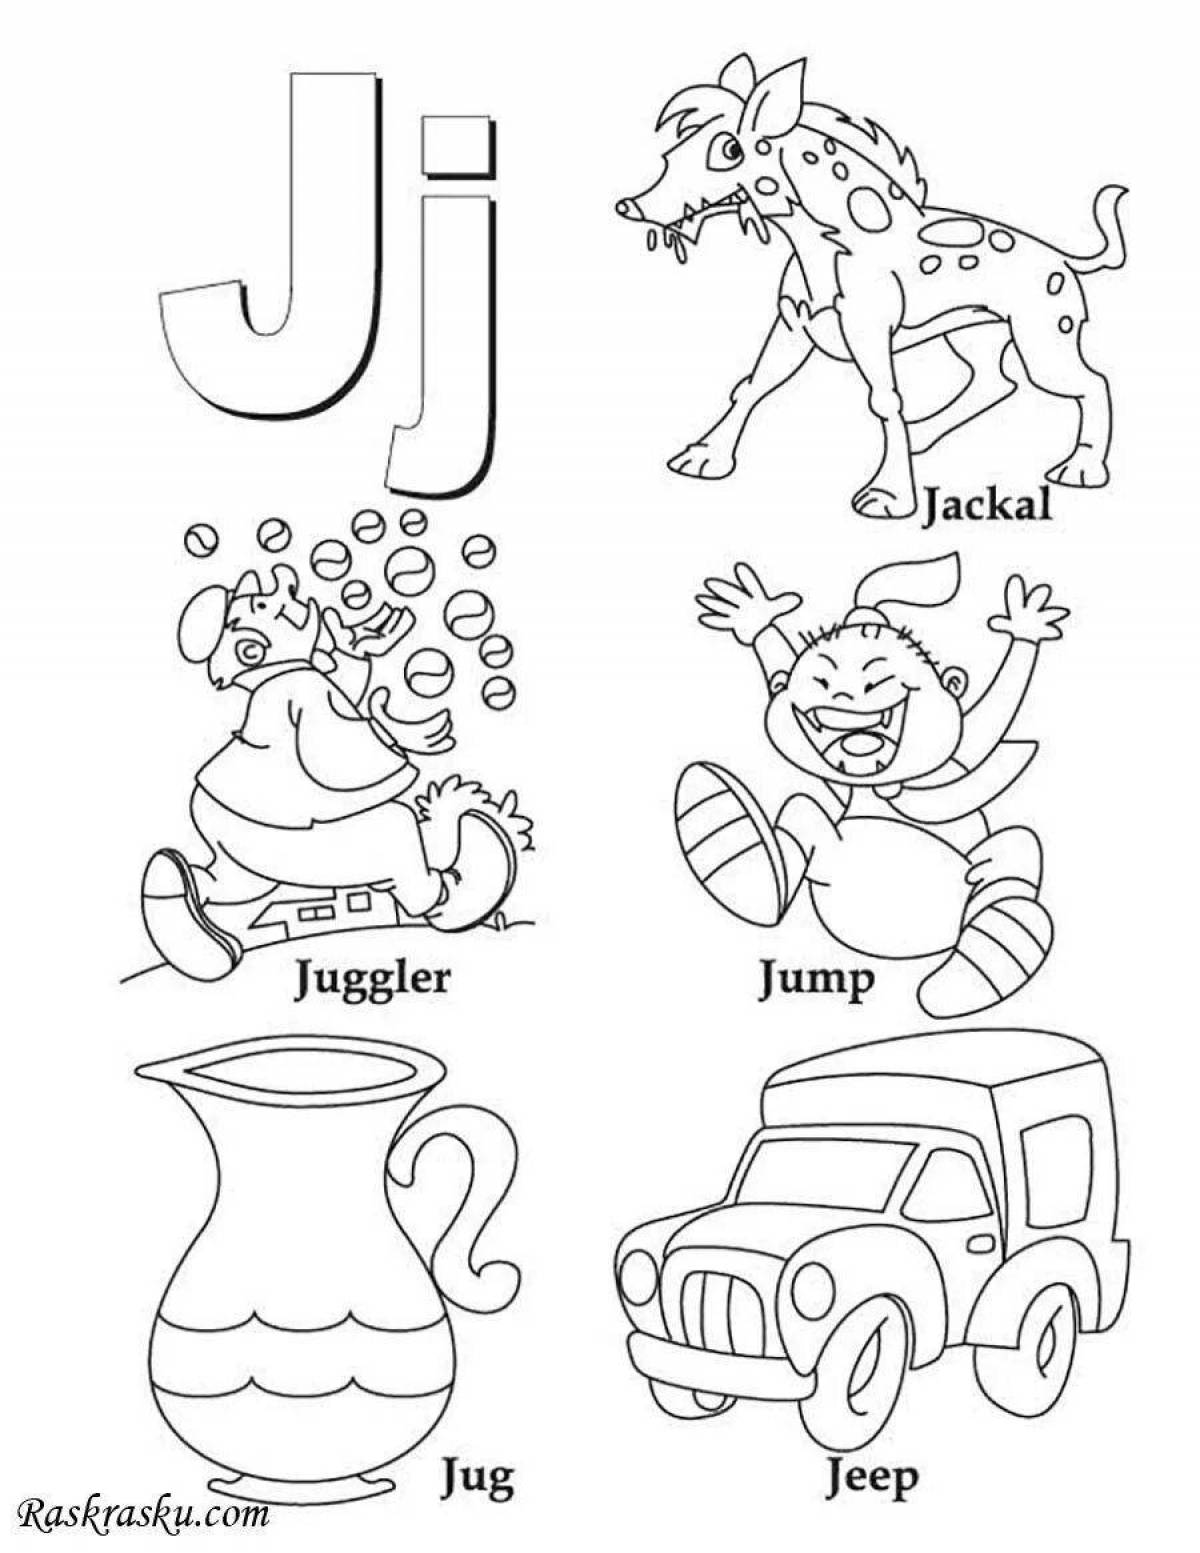 Creative English alphabet coloring for kids